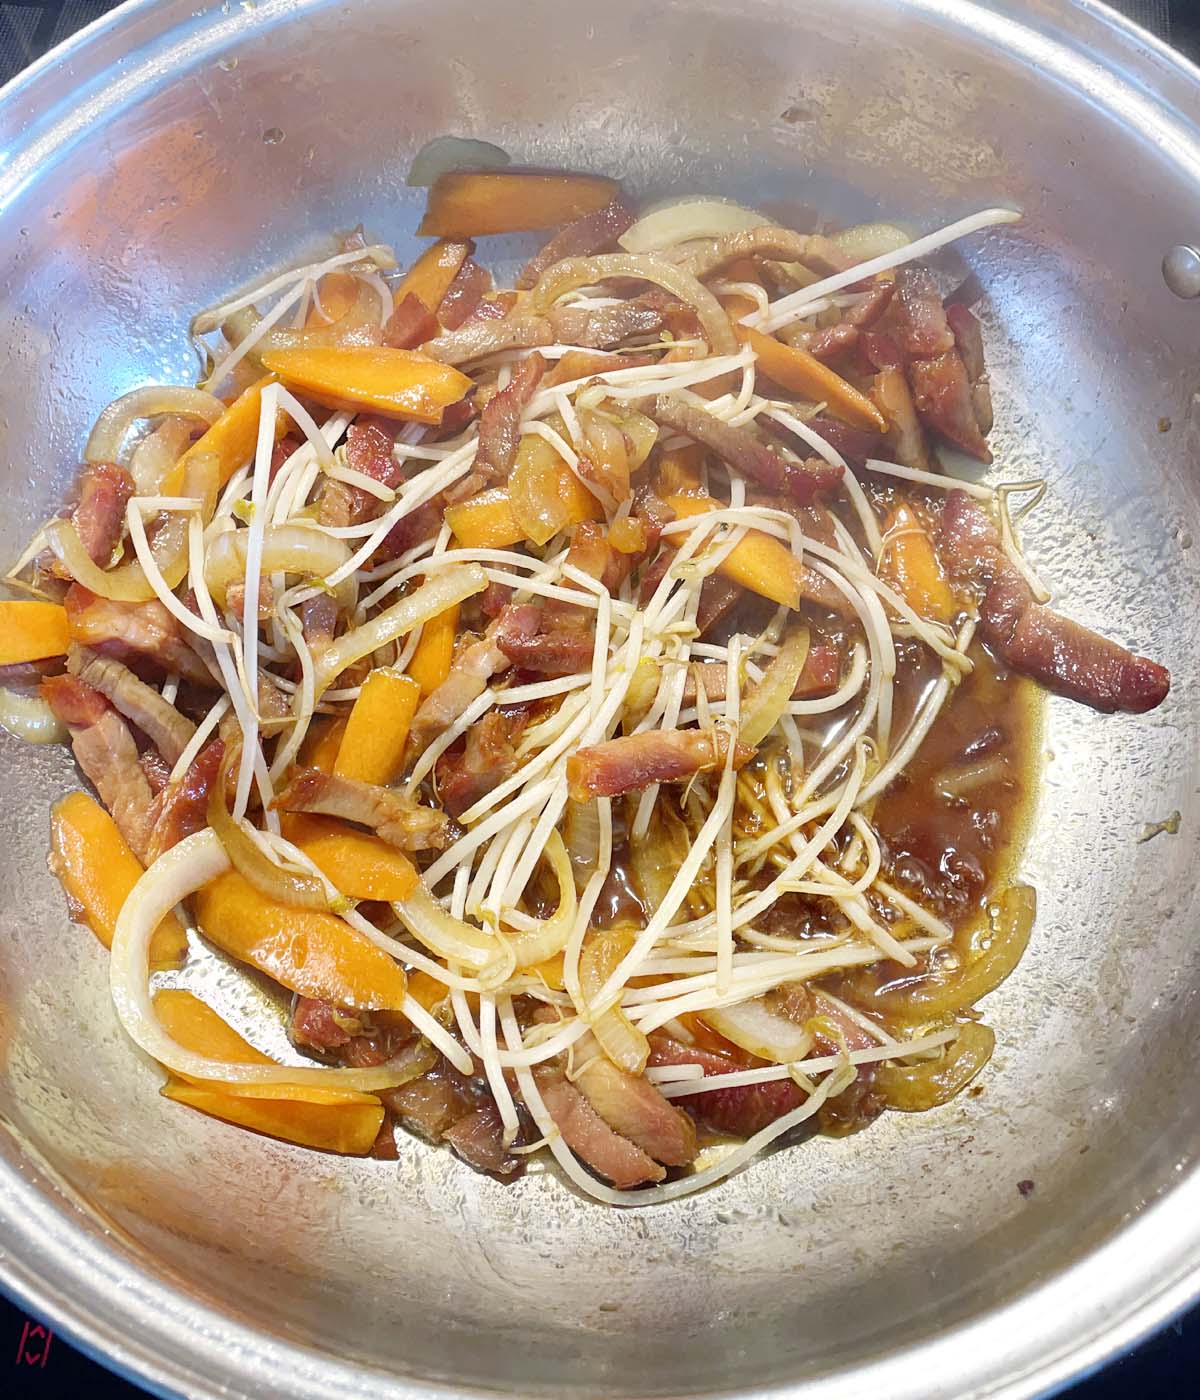 A round metal wok containing carrots, onions, bean sprouts, and meat in a brown sauce.